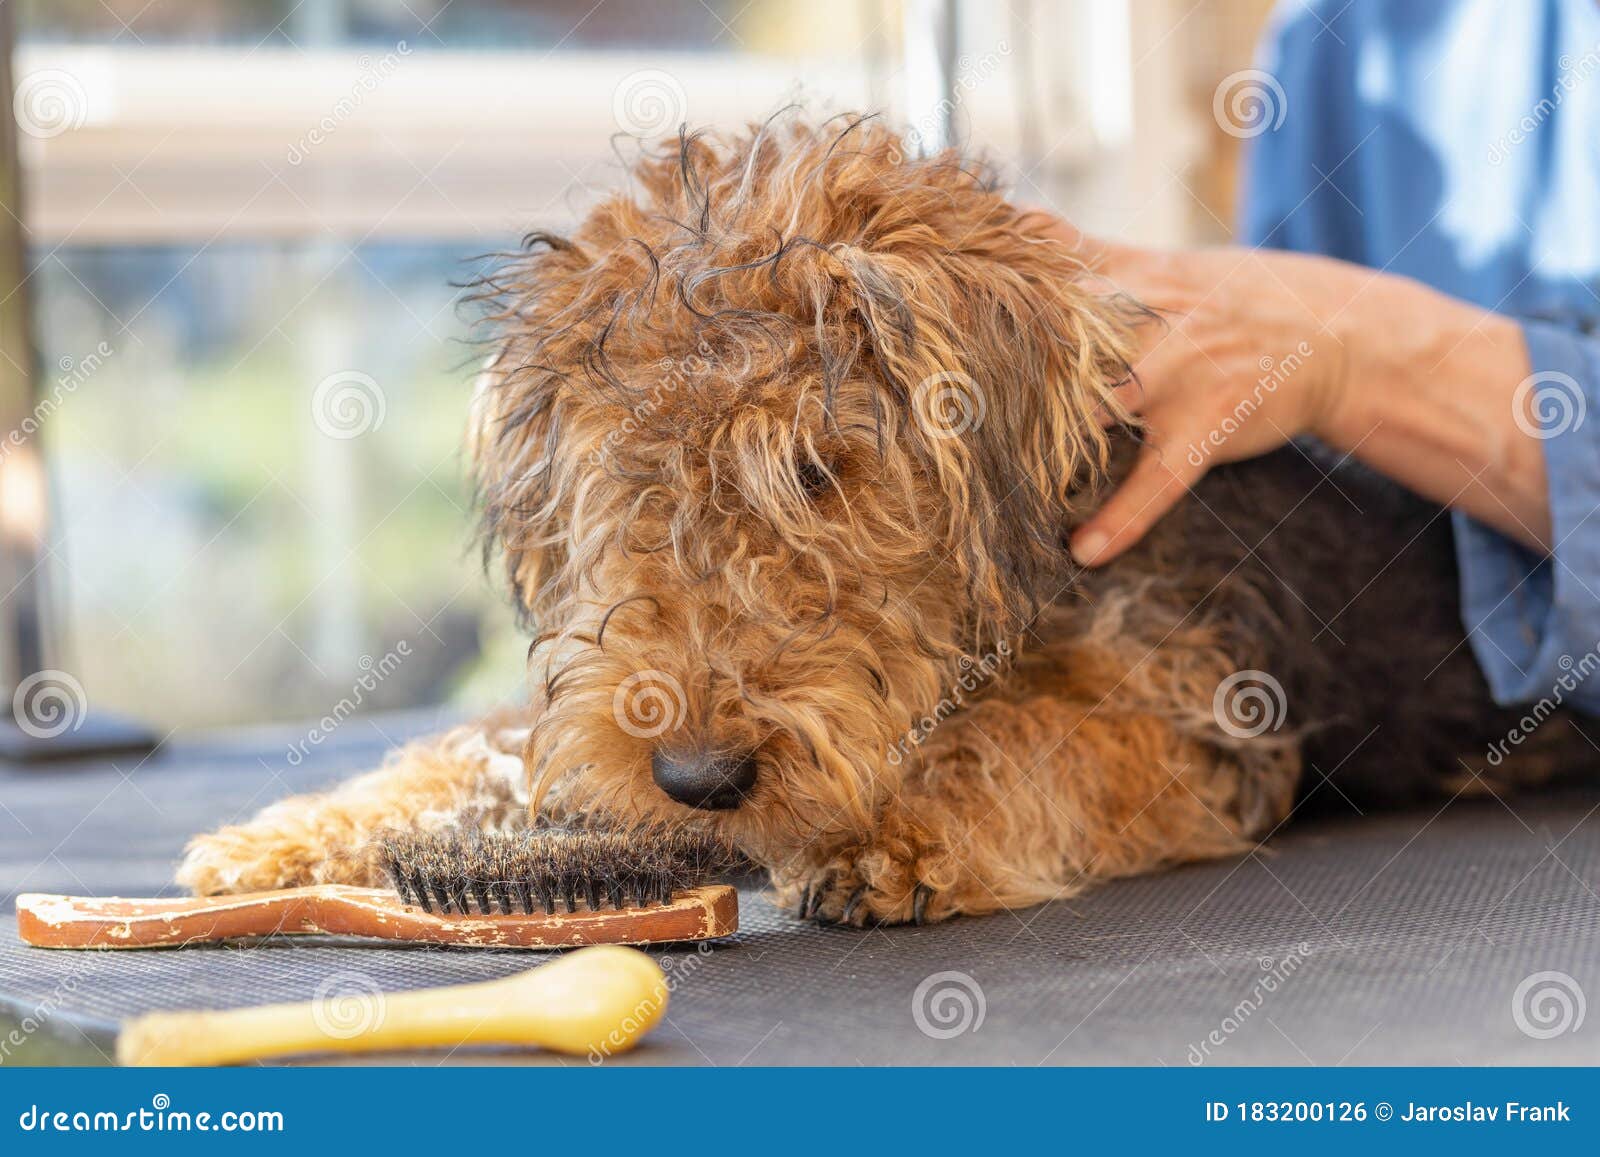 Closeup View Of Groomed Puppy Of Welsh Terrier Looking ...